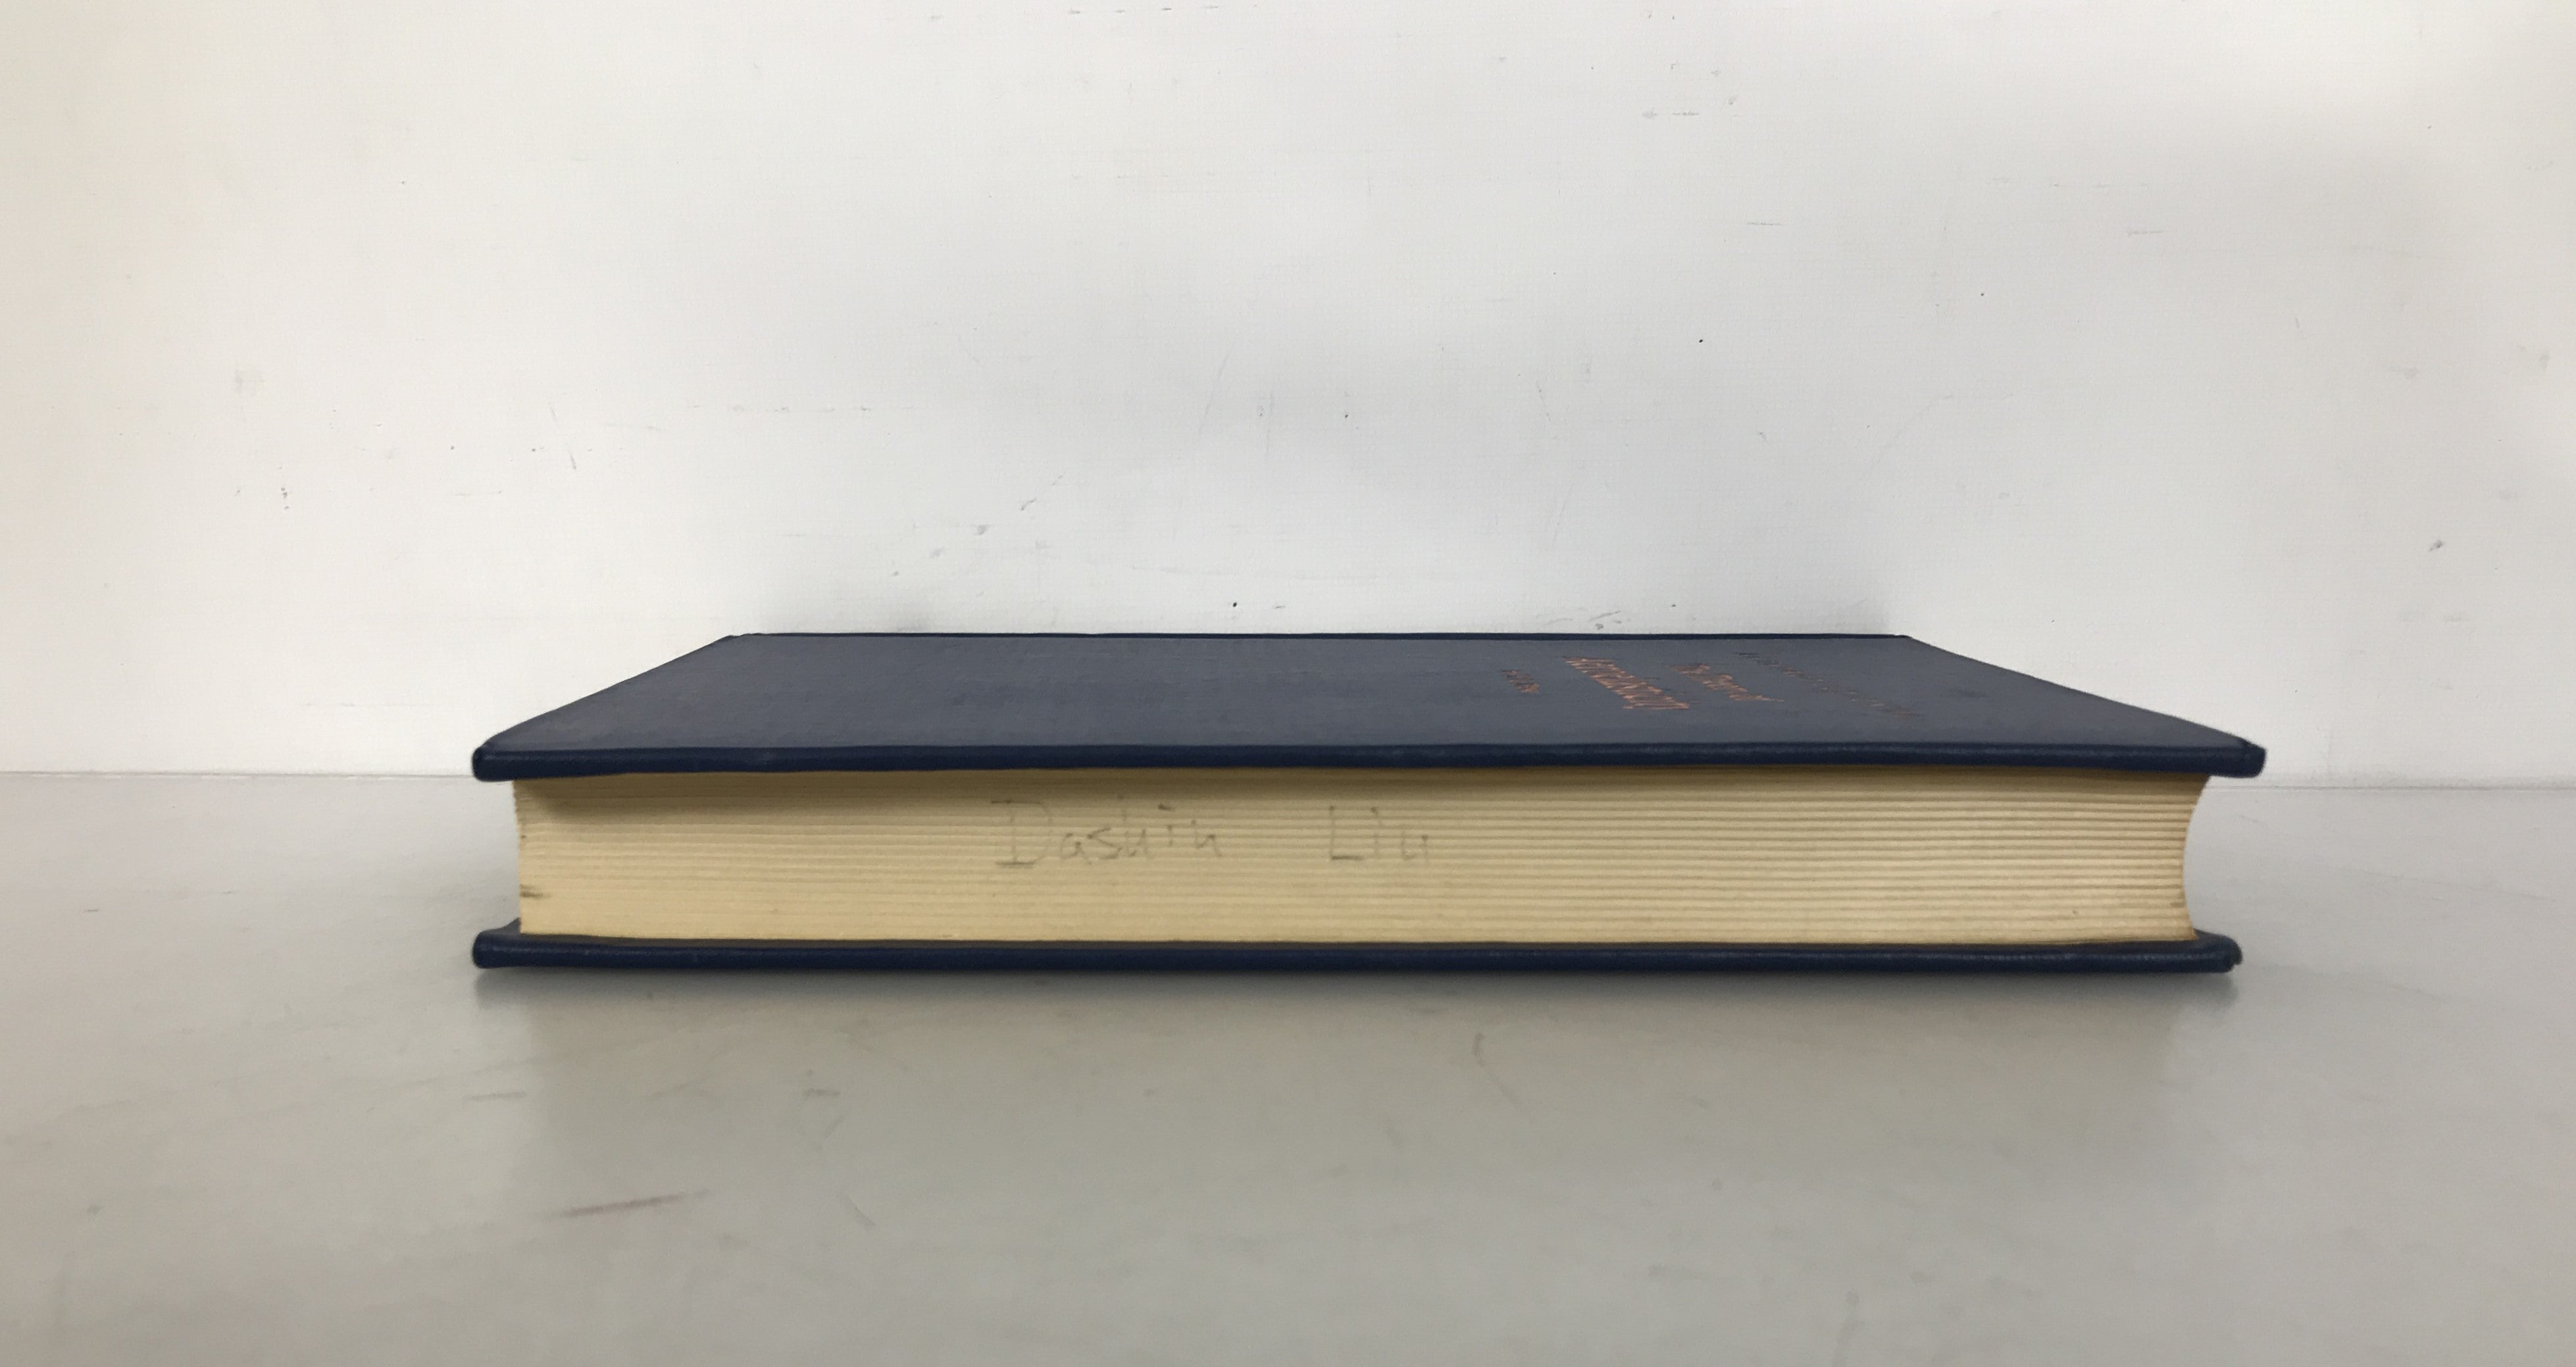 An Introduction to the Theory of Aeroelasticity by Y.C. Fung 1969 HC